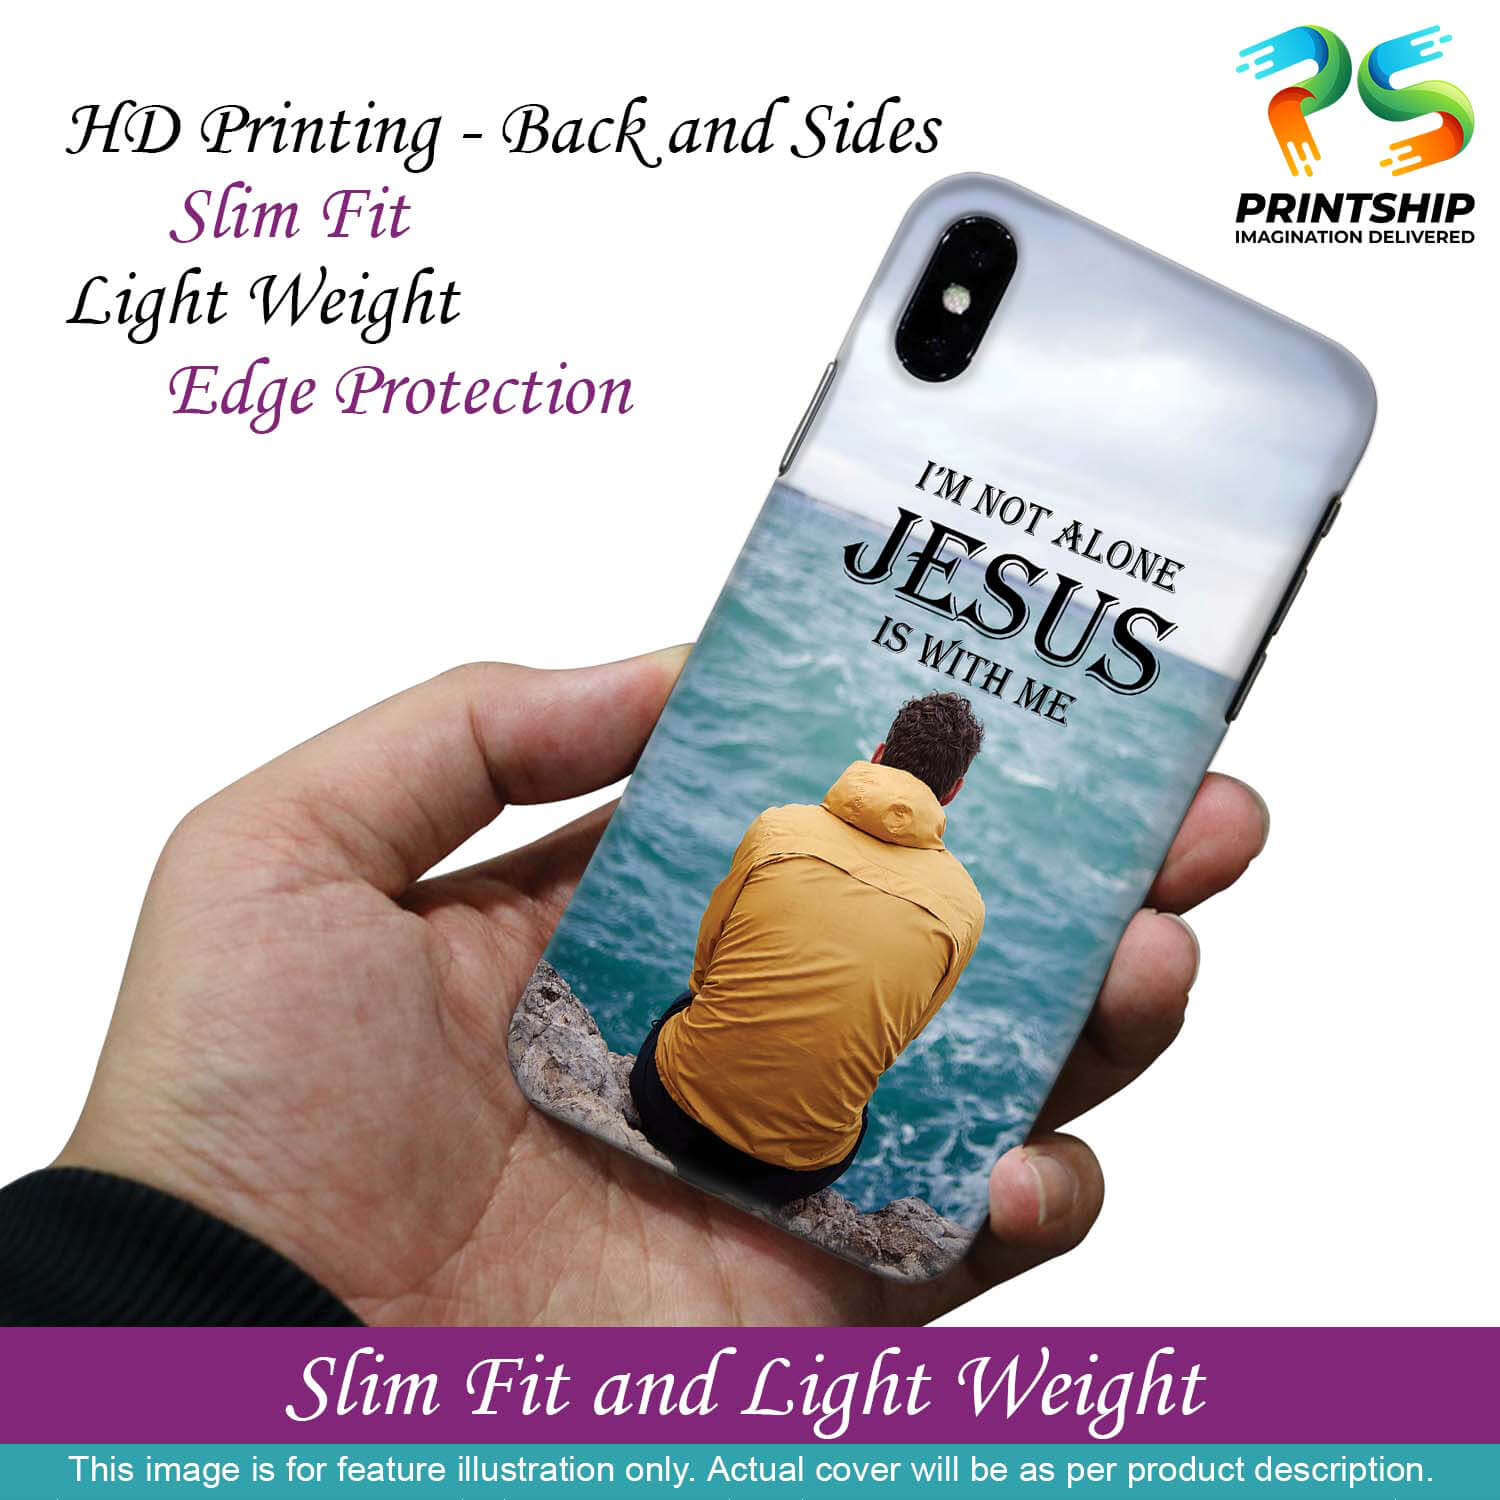 W0007-Jesus is with Me Back Cover for Samsung Galaxy A23